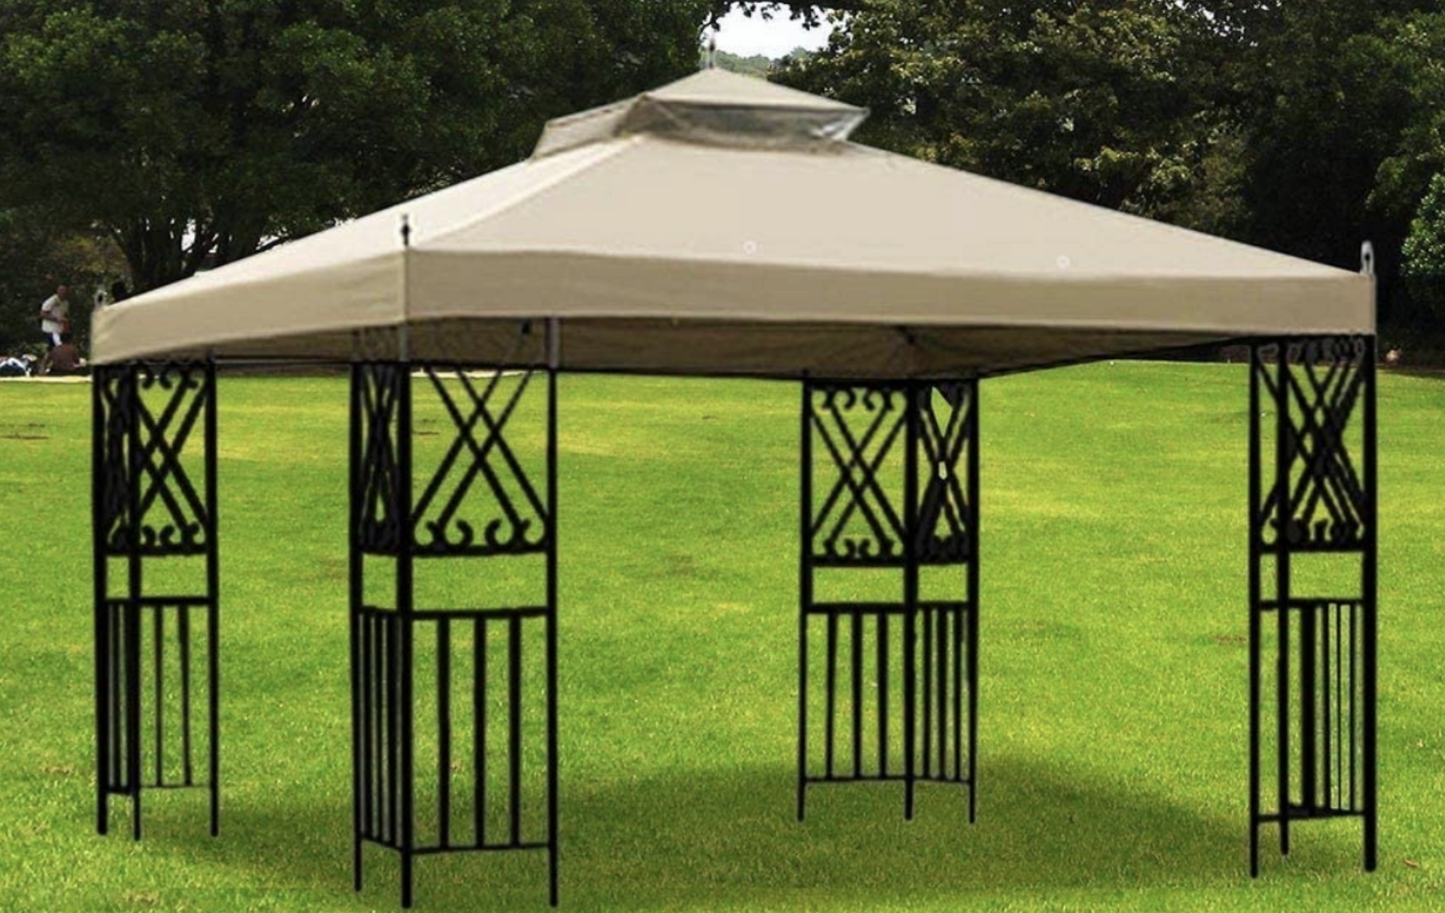 2 Tier 12x10' Gazebo Canopy Top Cover Replacement for Sunjoy L-GZ288PST-4D